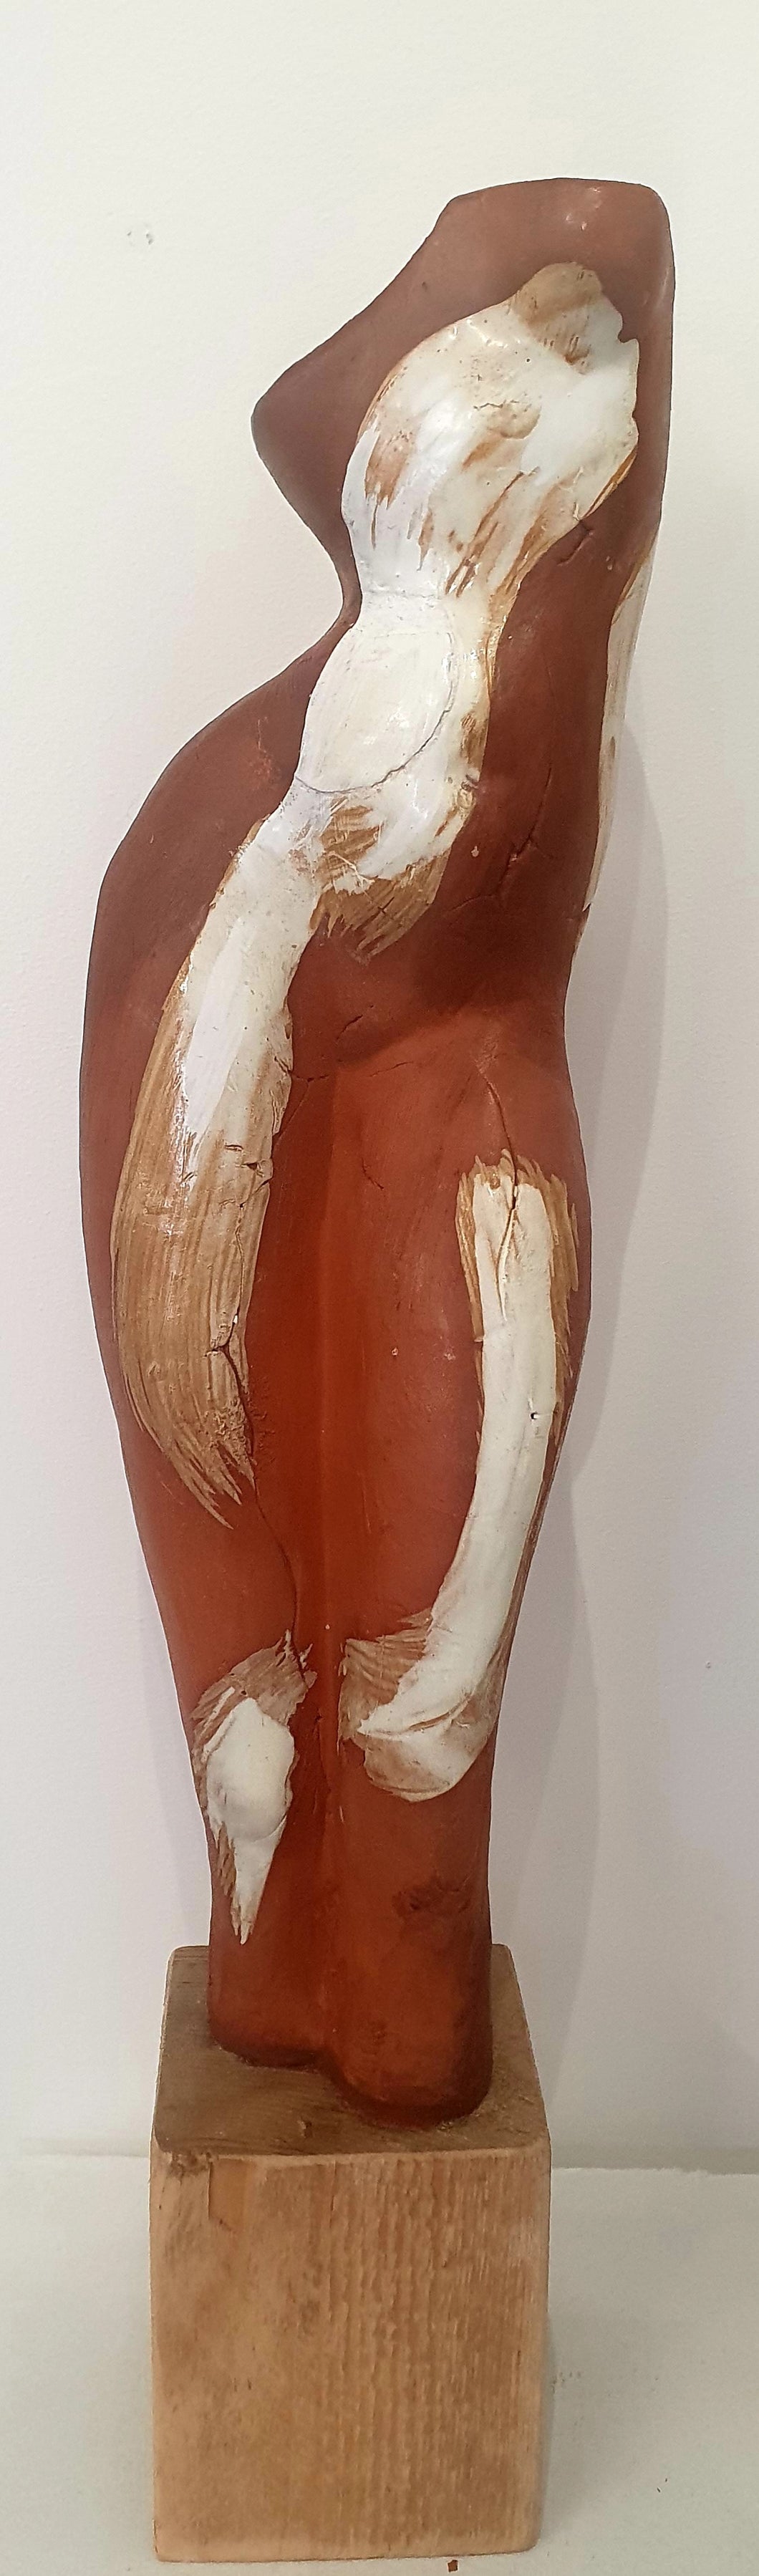 Figurative sculpture SA by Sophie Howard